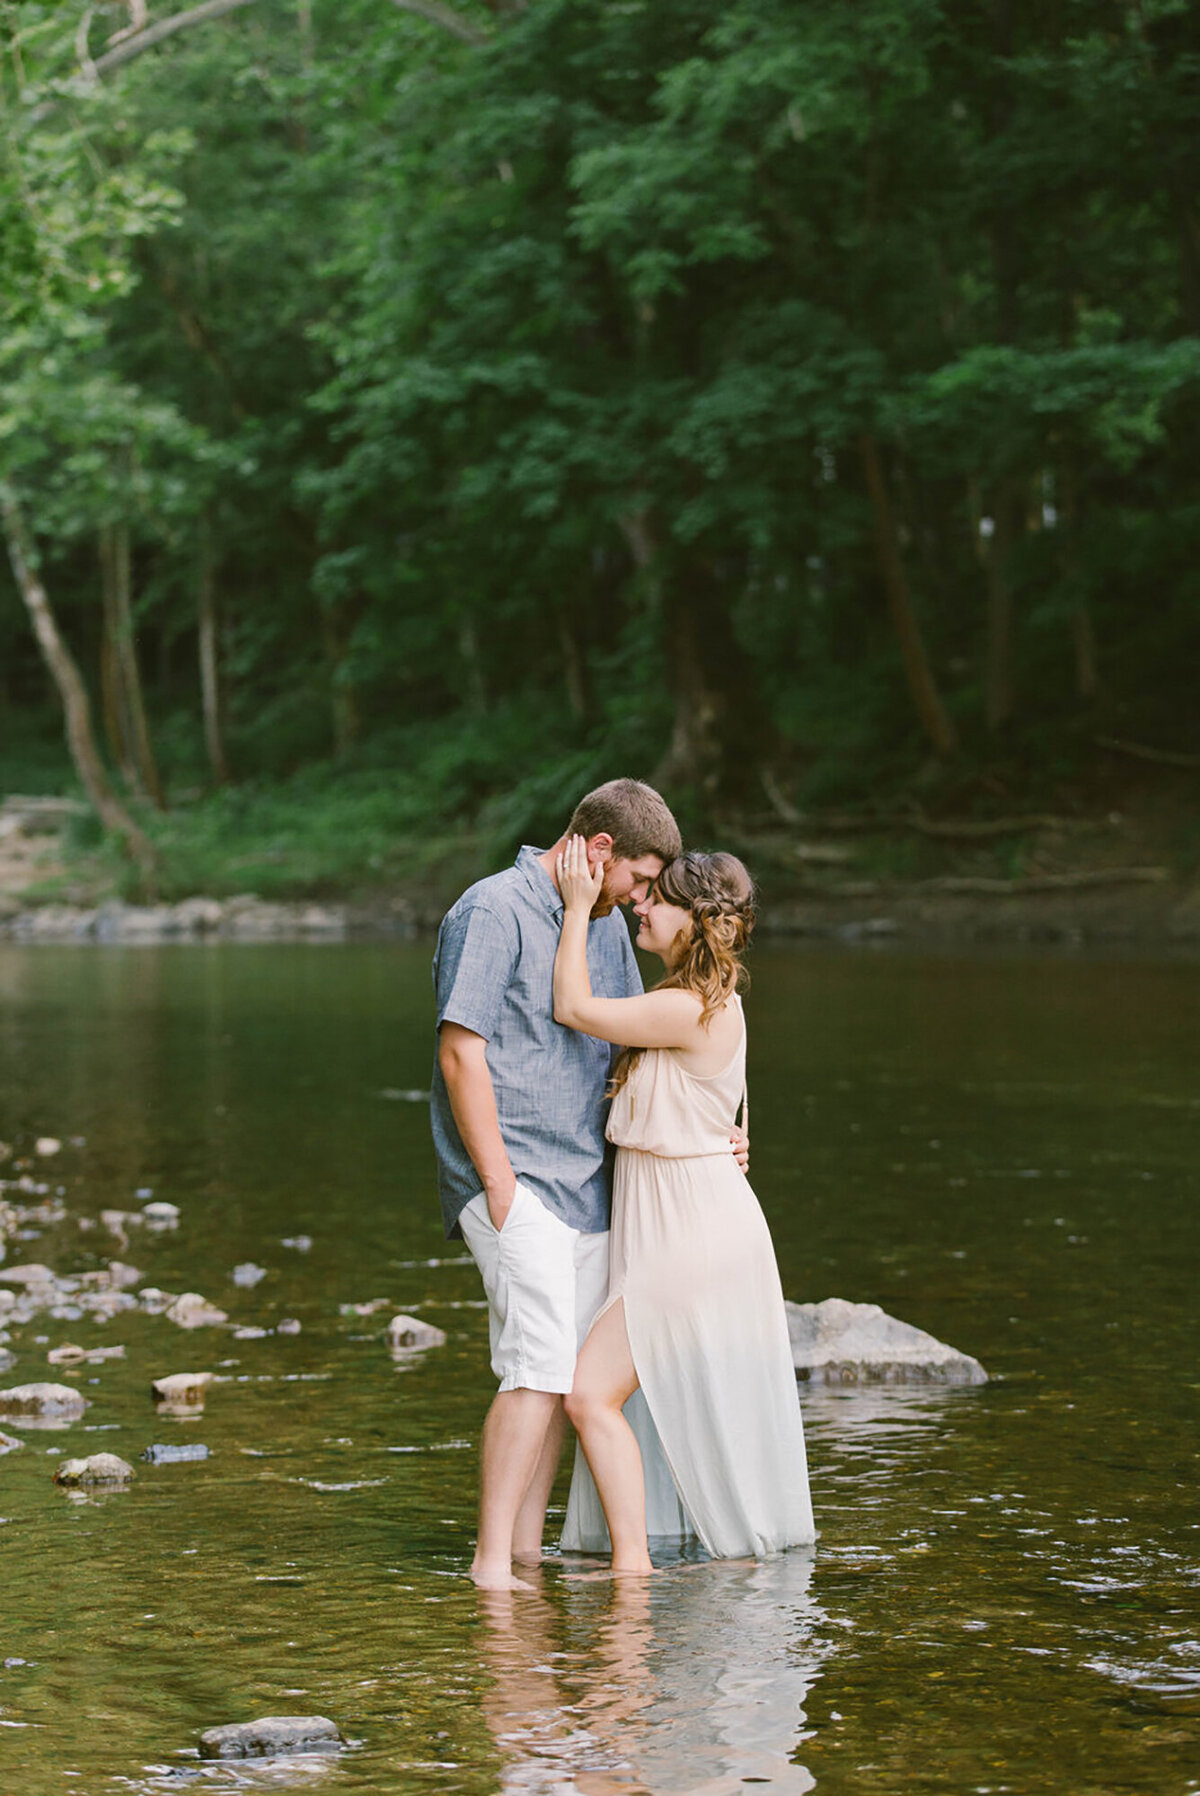 engagement portraits taken in a lake